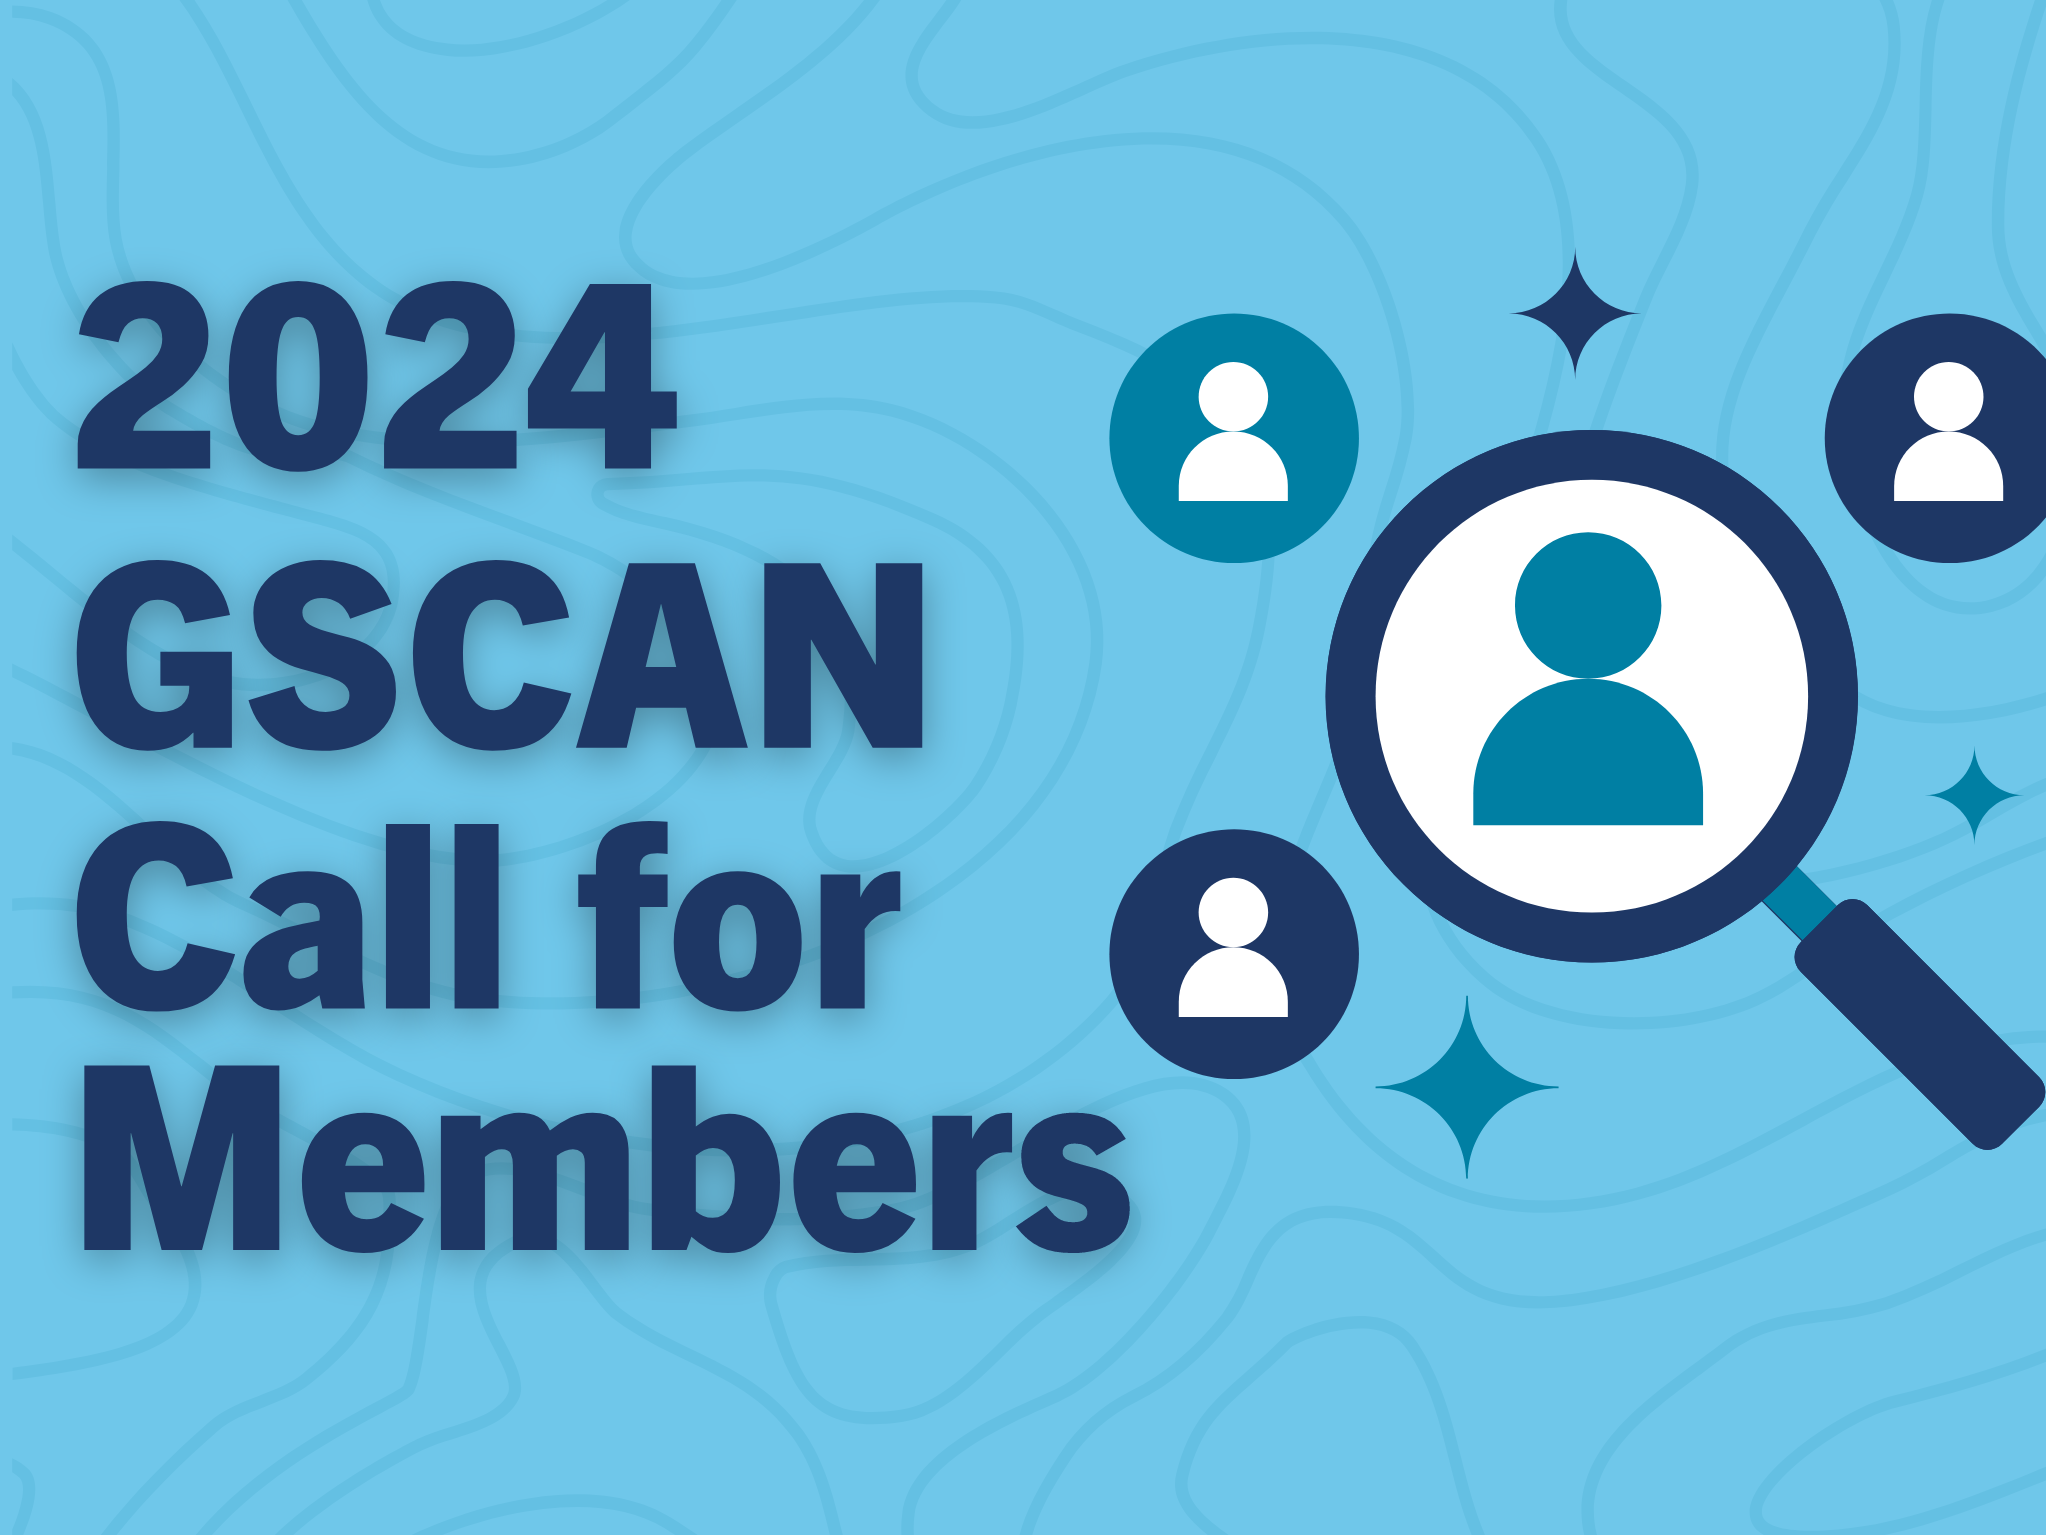 Clipart of a maginifying glass with the icon of a person in the centre, and clip art icons of people around the magnifying glass, with the text, 2024 GSCAN Call for Members